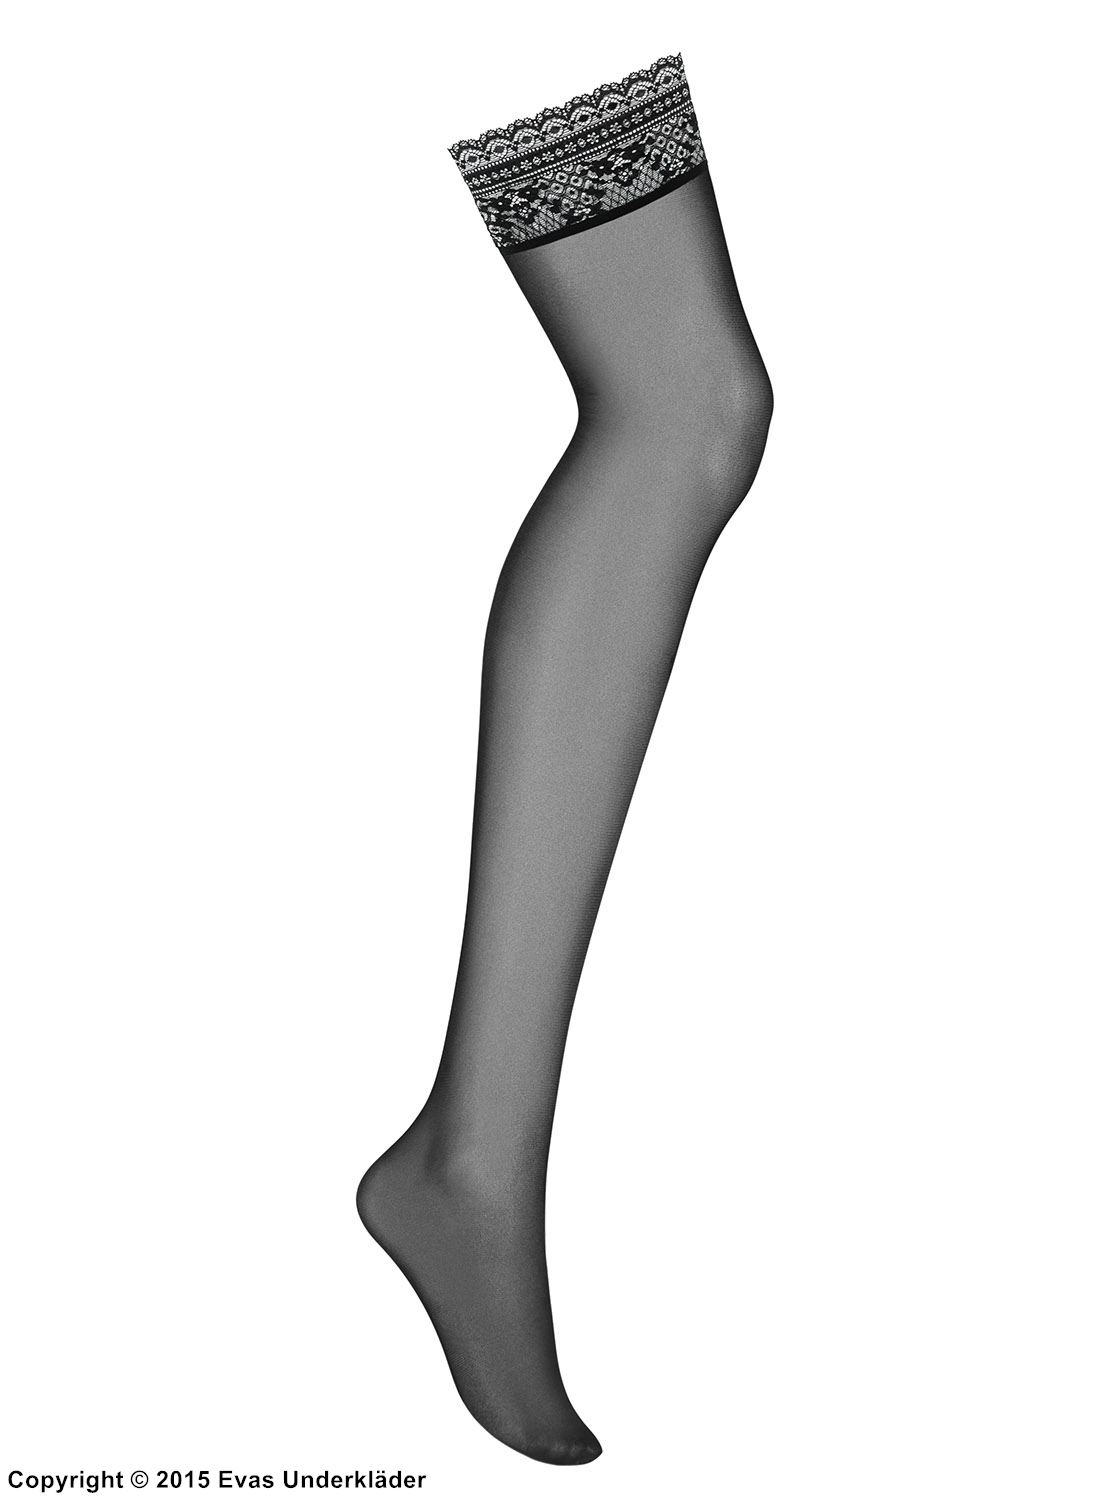 Thigh high stockings, lace edge, without back seam